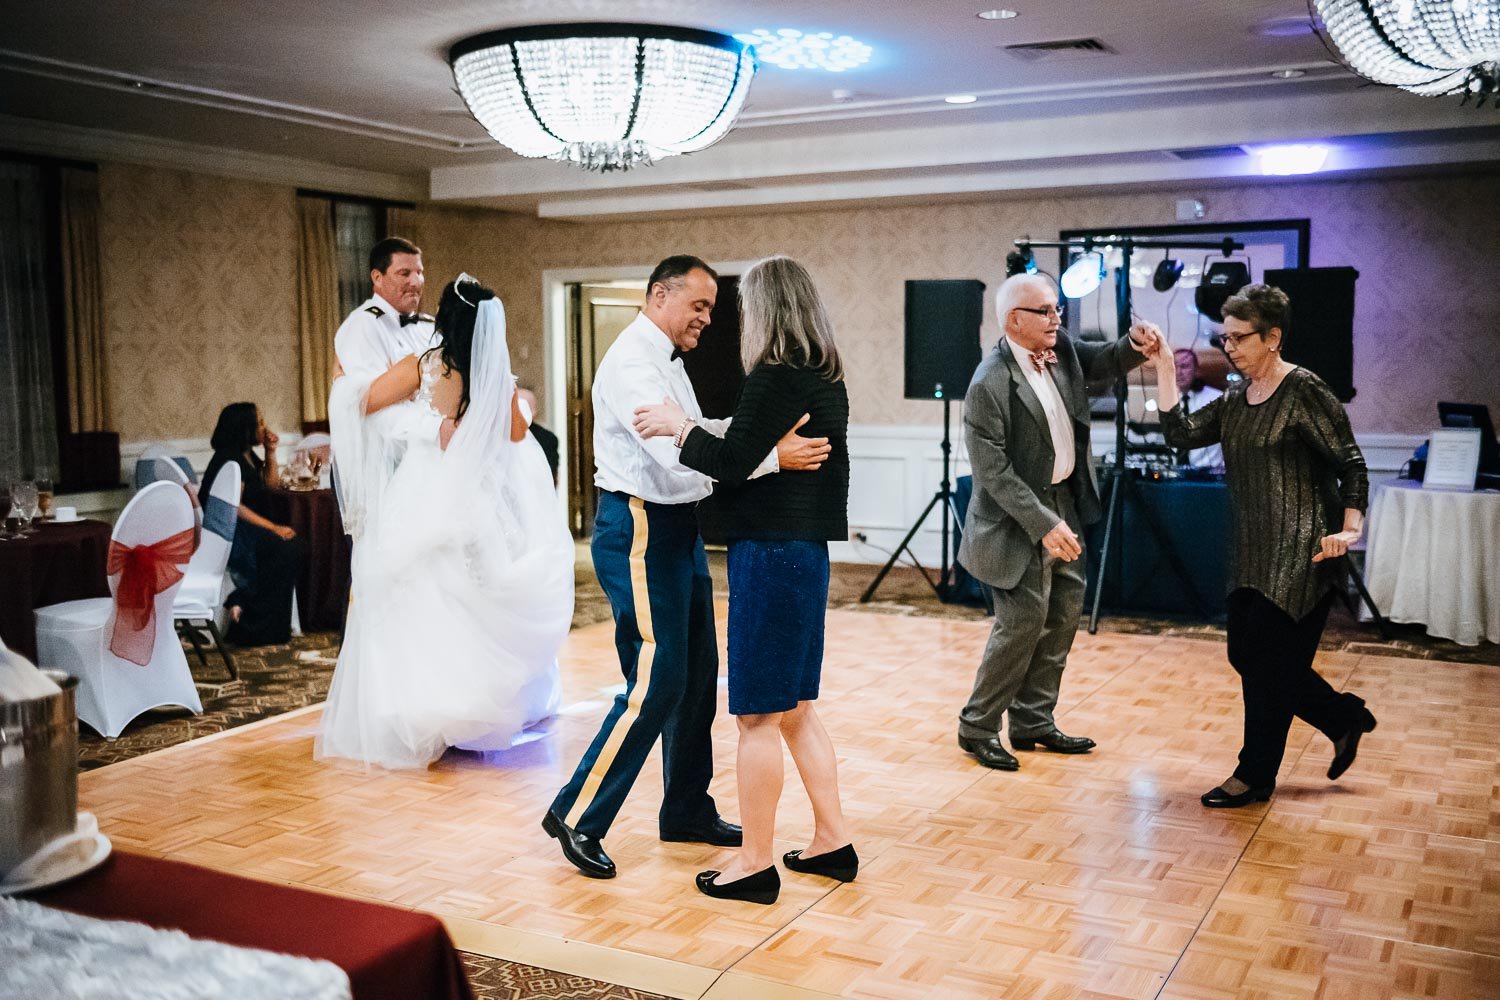 Friends and family dance the night away in an intimate wedding reception at Omni La Mansion Riverwalk hotel in San Antonio Texas